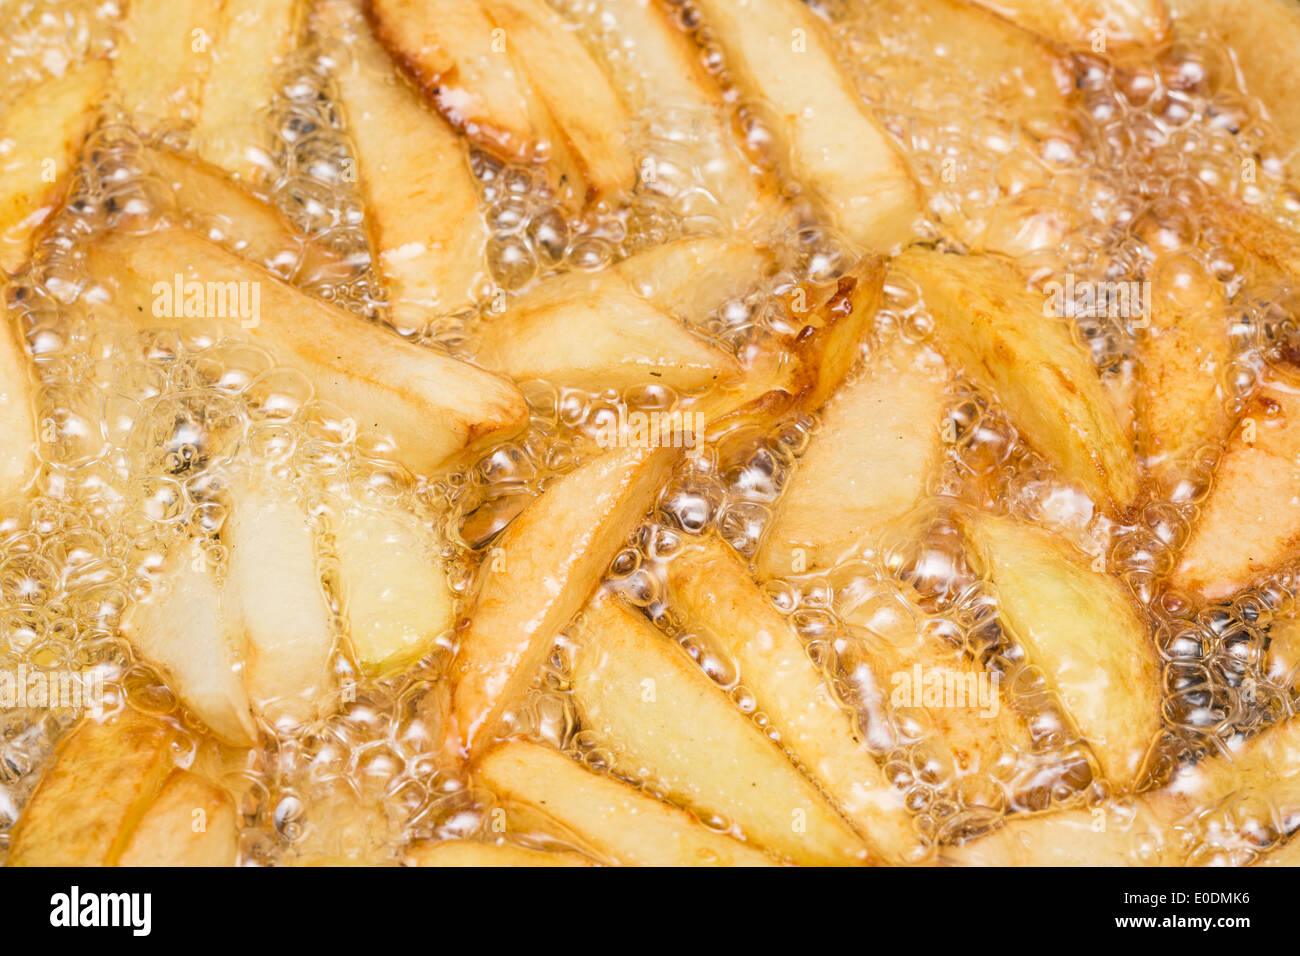 Preparing French Fries In Hot Boiling Oil With Fresh Potato Chips Stock Photo